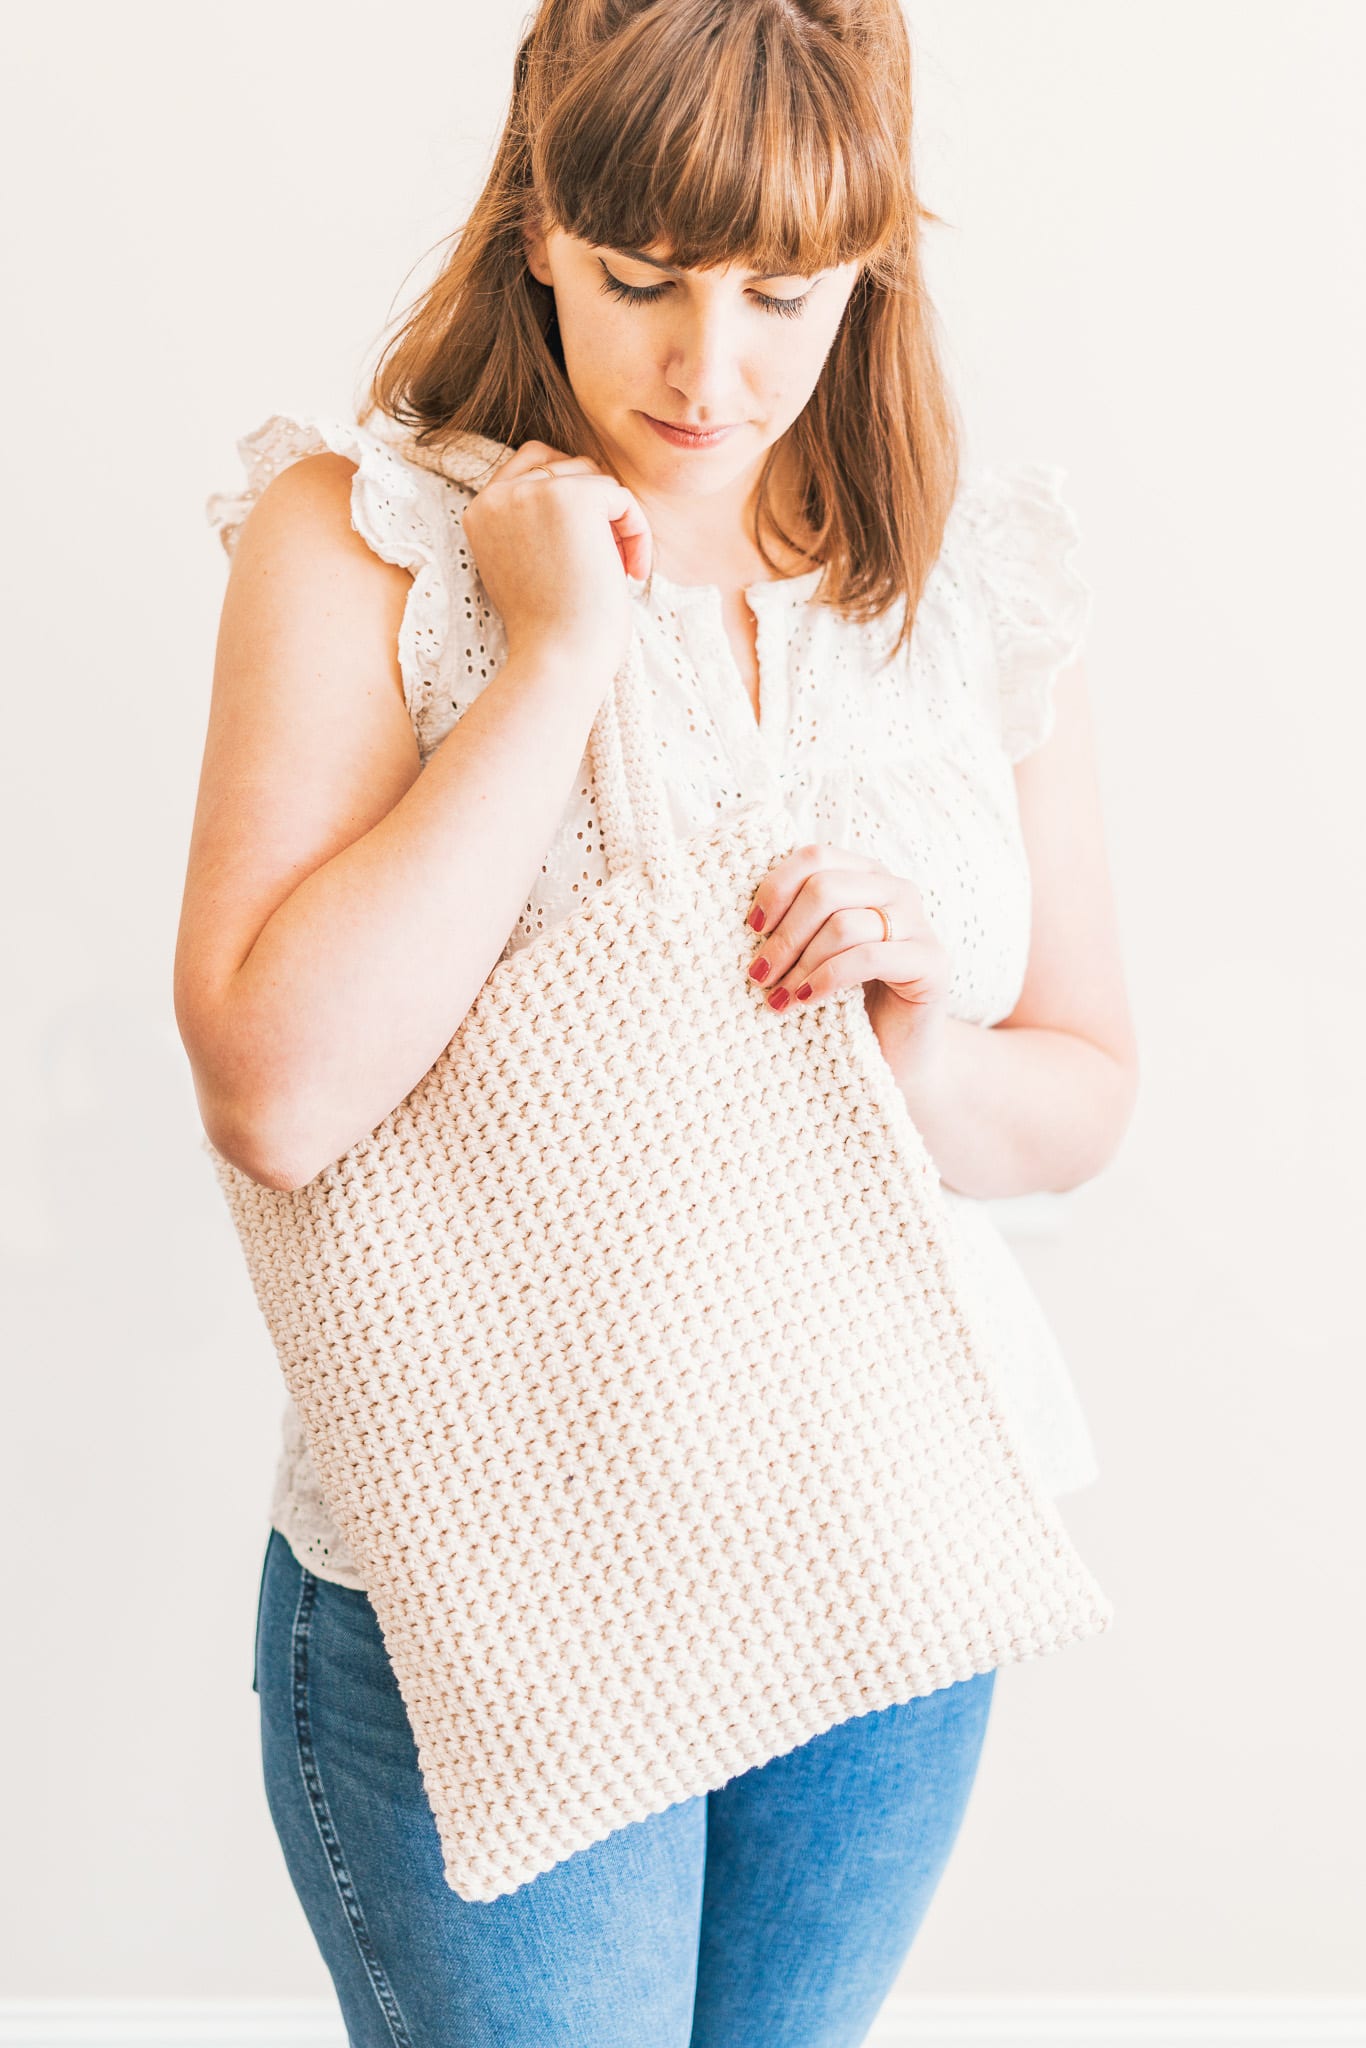 Classic crochet tote bag for summer markets.